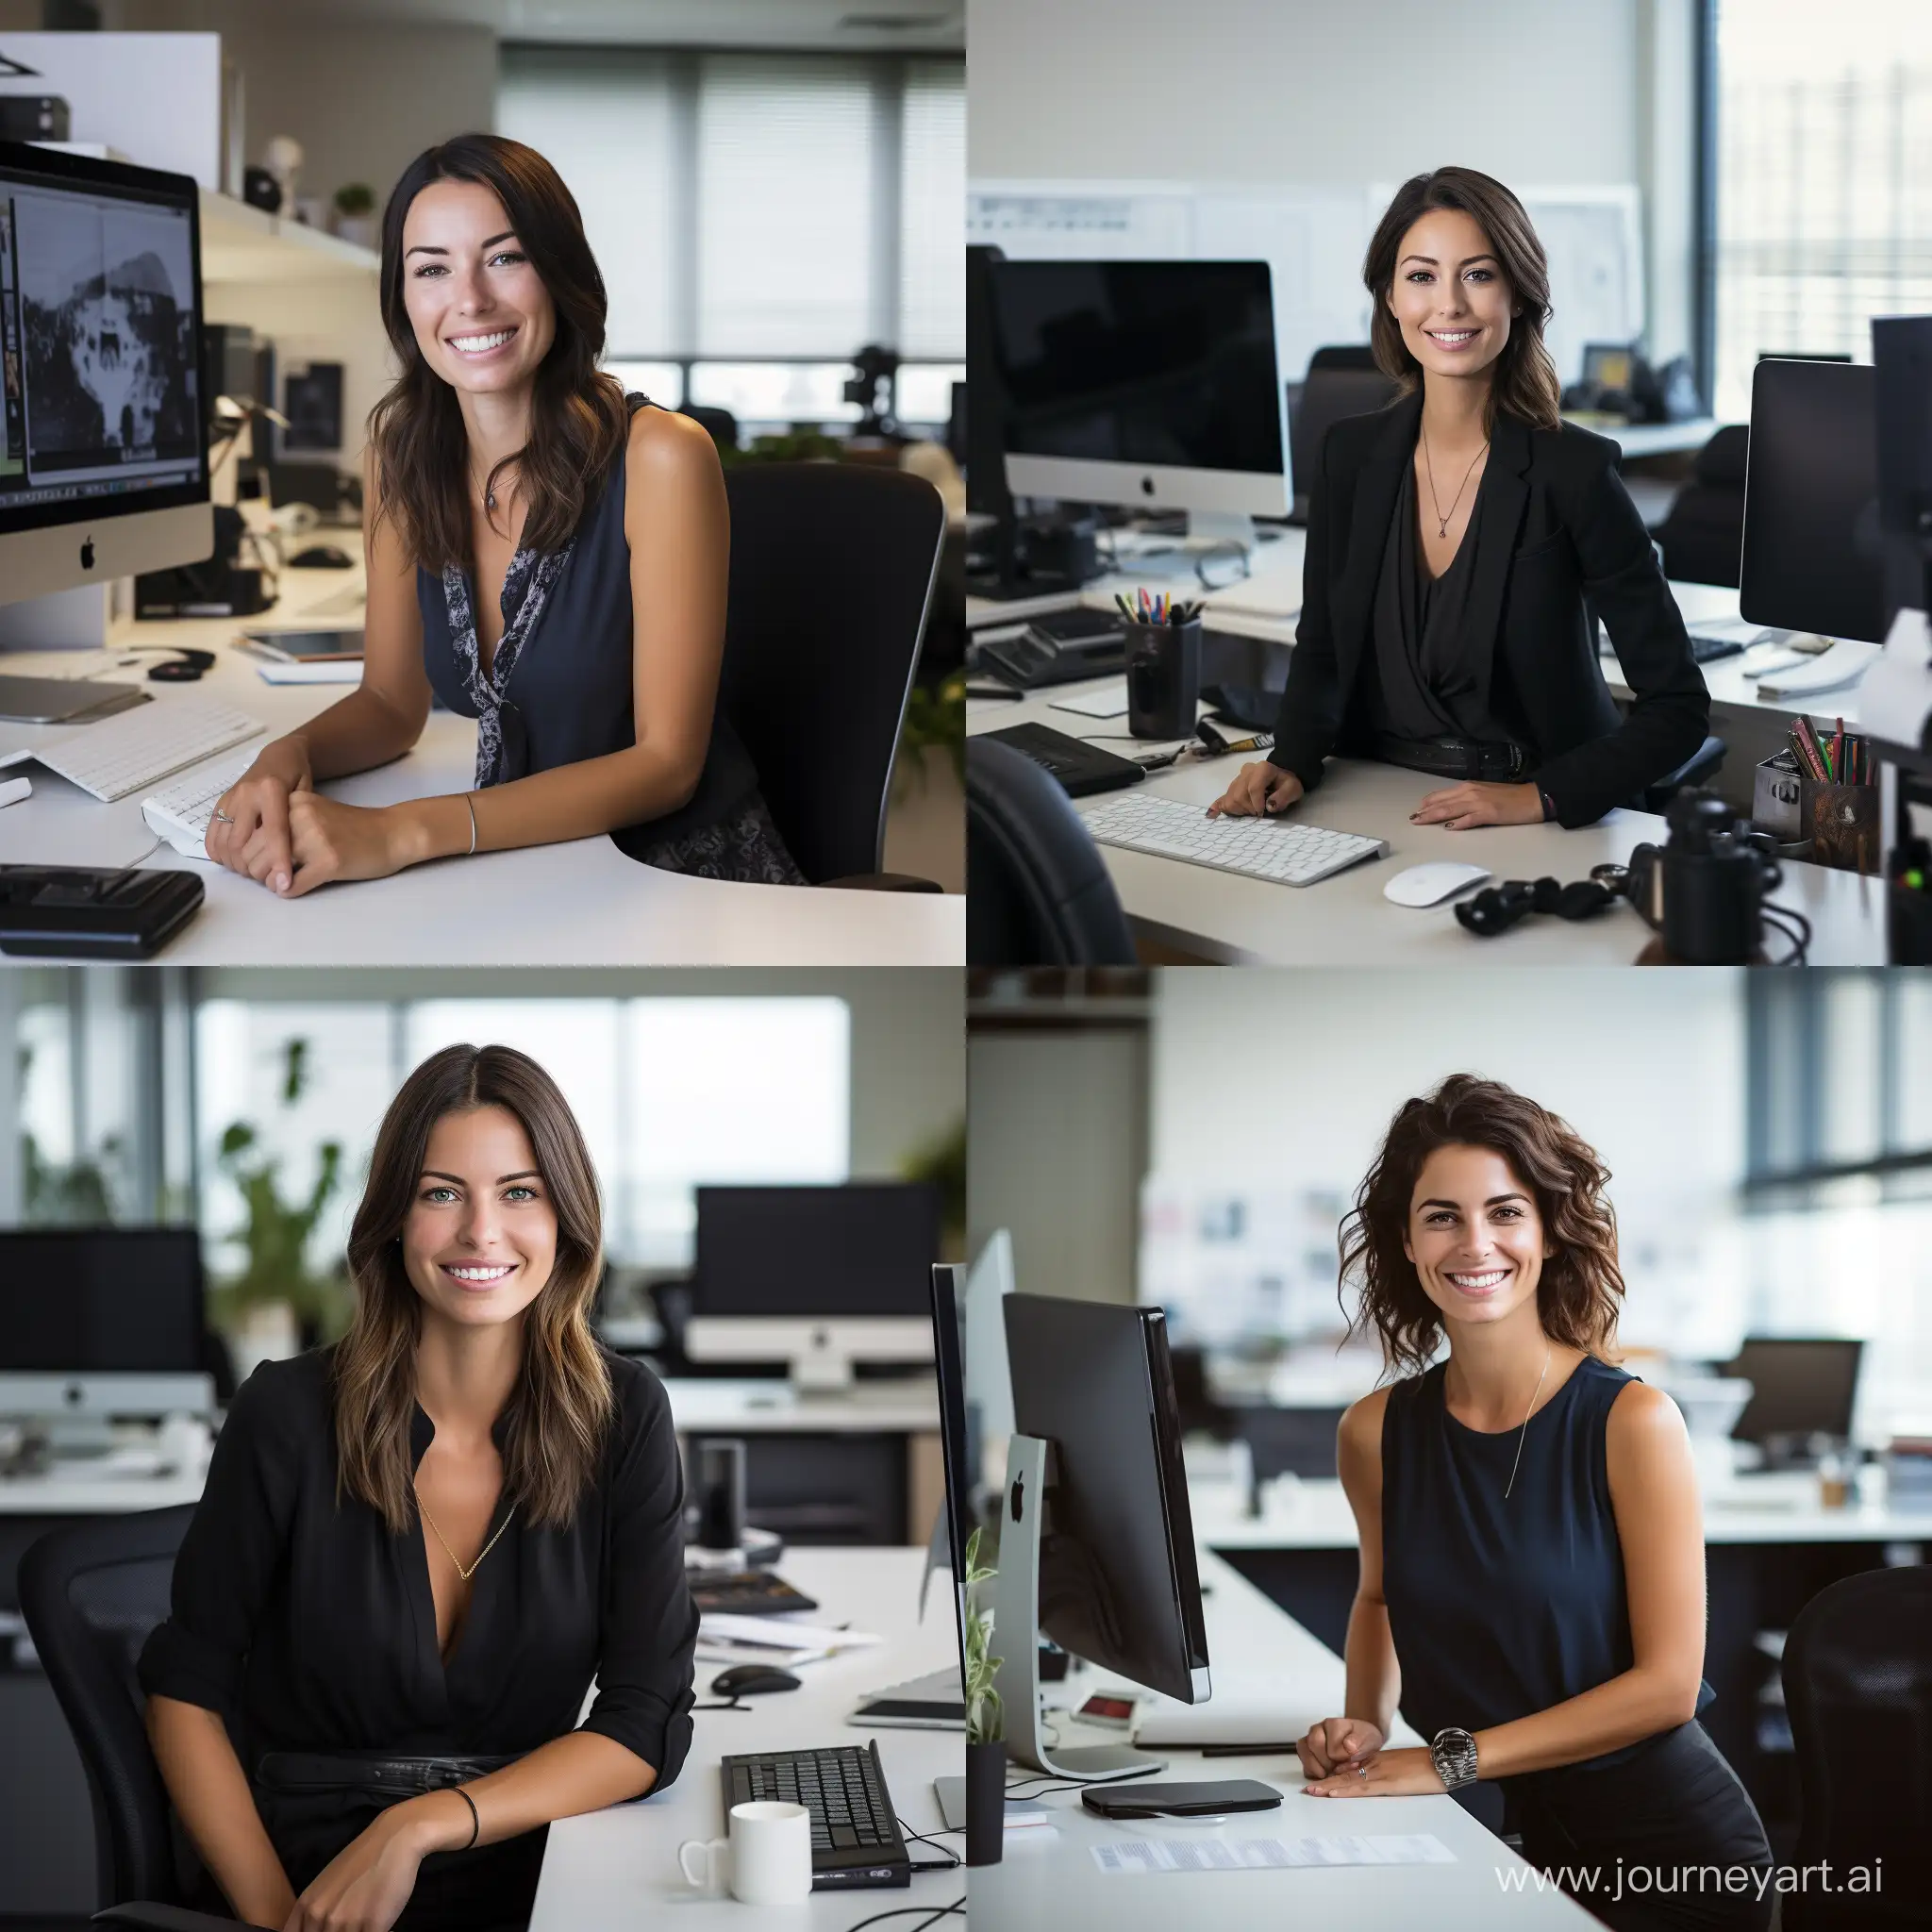 Smiling-Corporate-Professional-at-Desk-with-Canon-EOS-5D-Mark-IV-DSLR-Camera